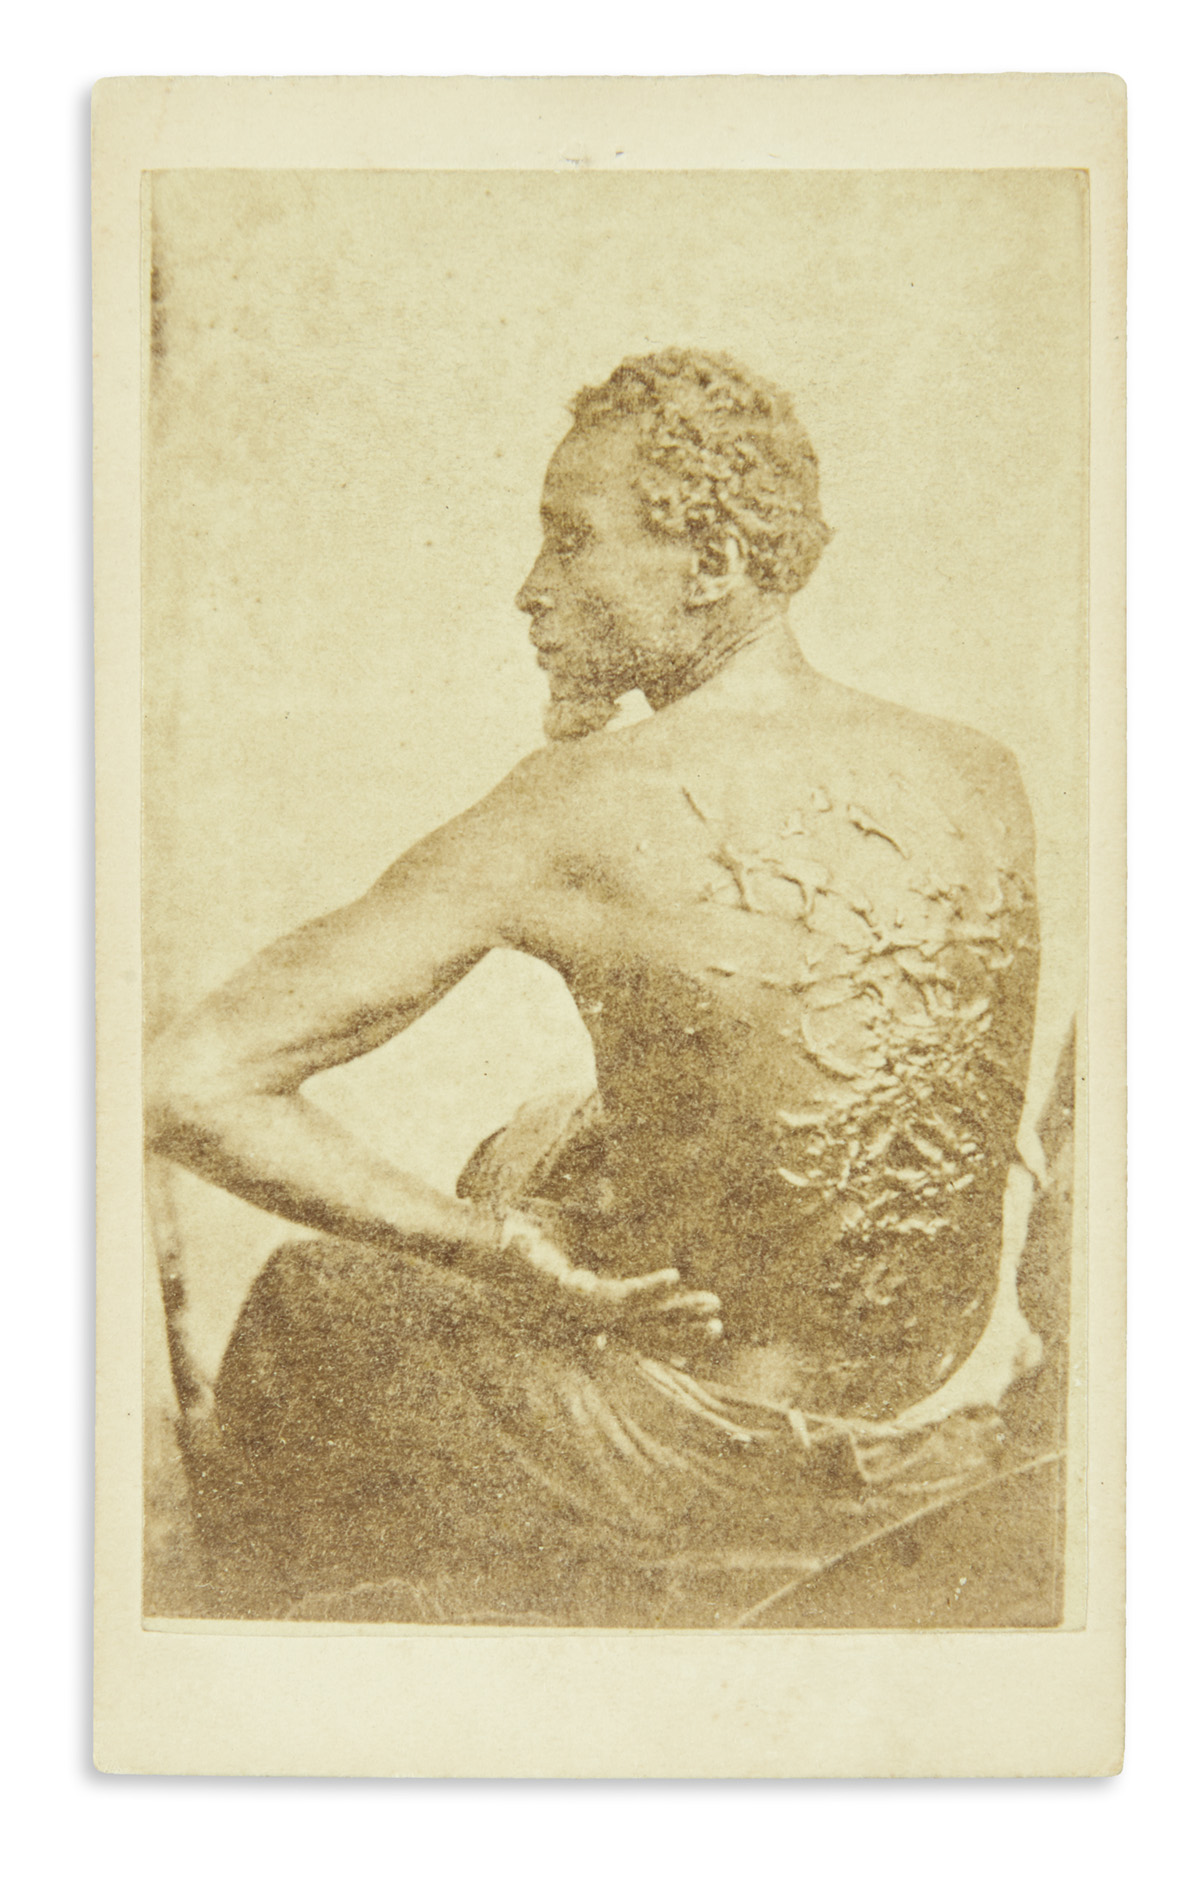 (SLAVERY AND ABOLITION.) [McPherson & Oliver; photographers.] The Scourged Back.